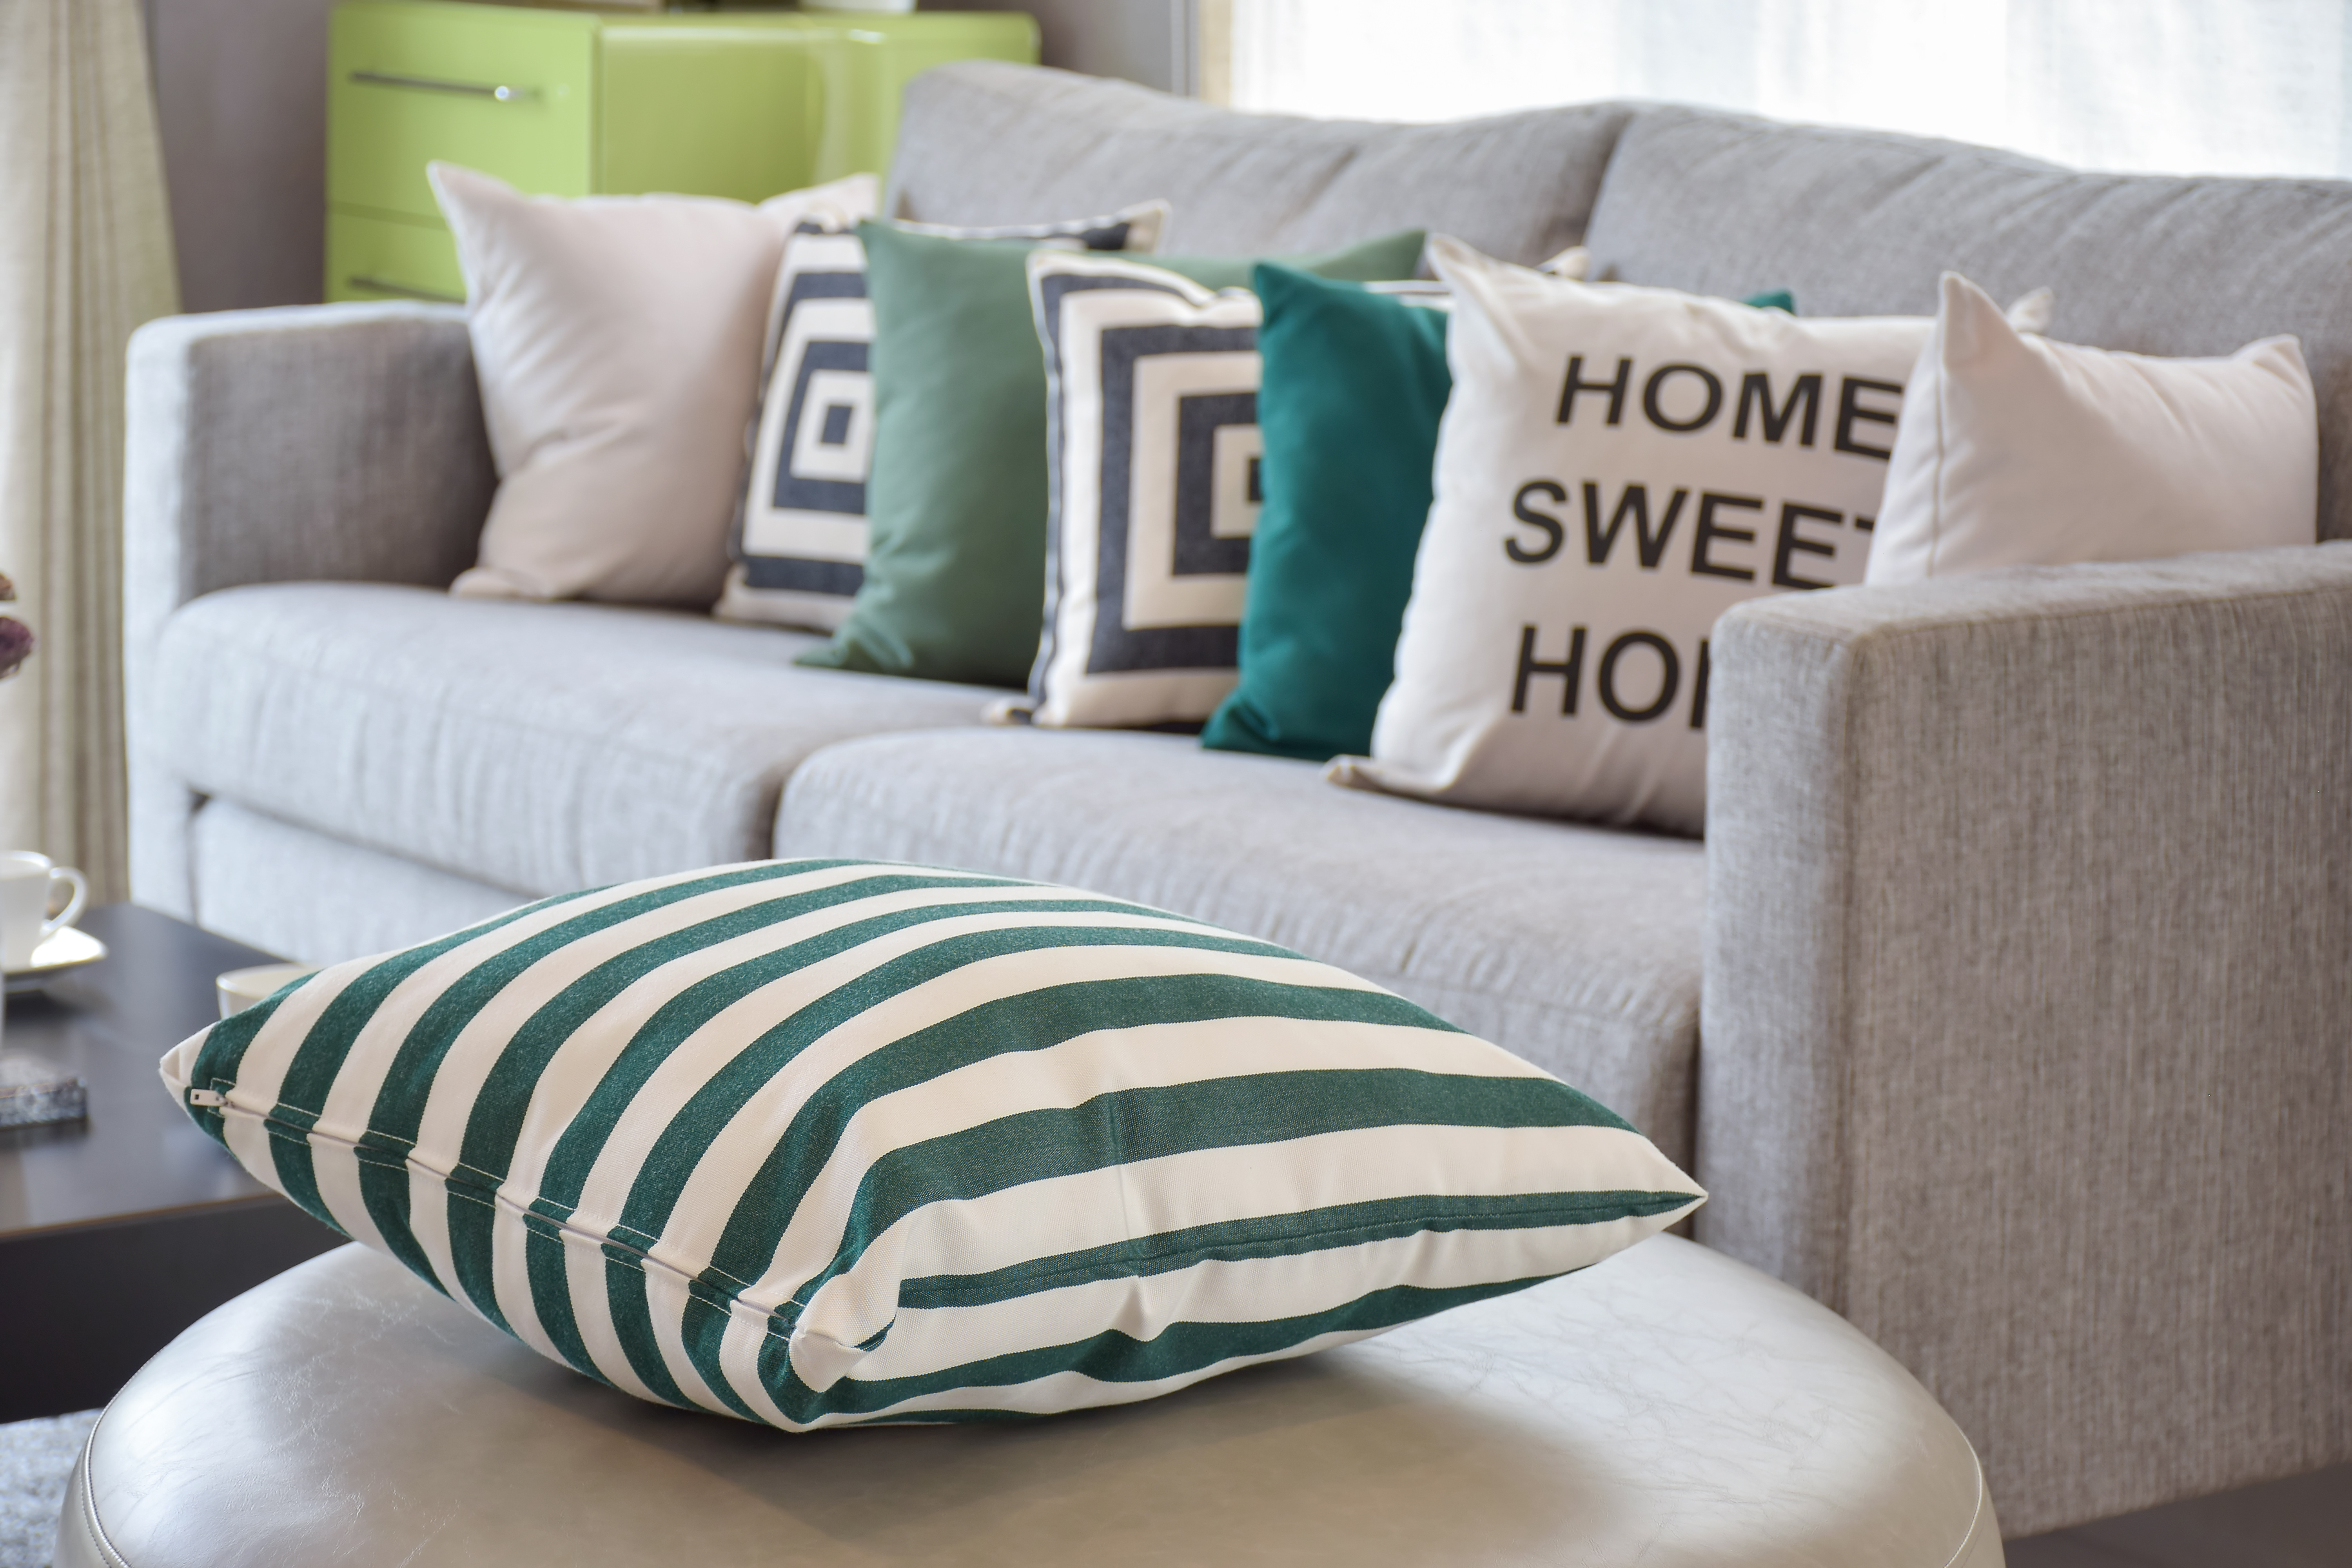 green striped pillows on the cozy grey sofa in the living room